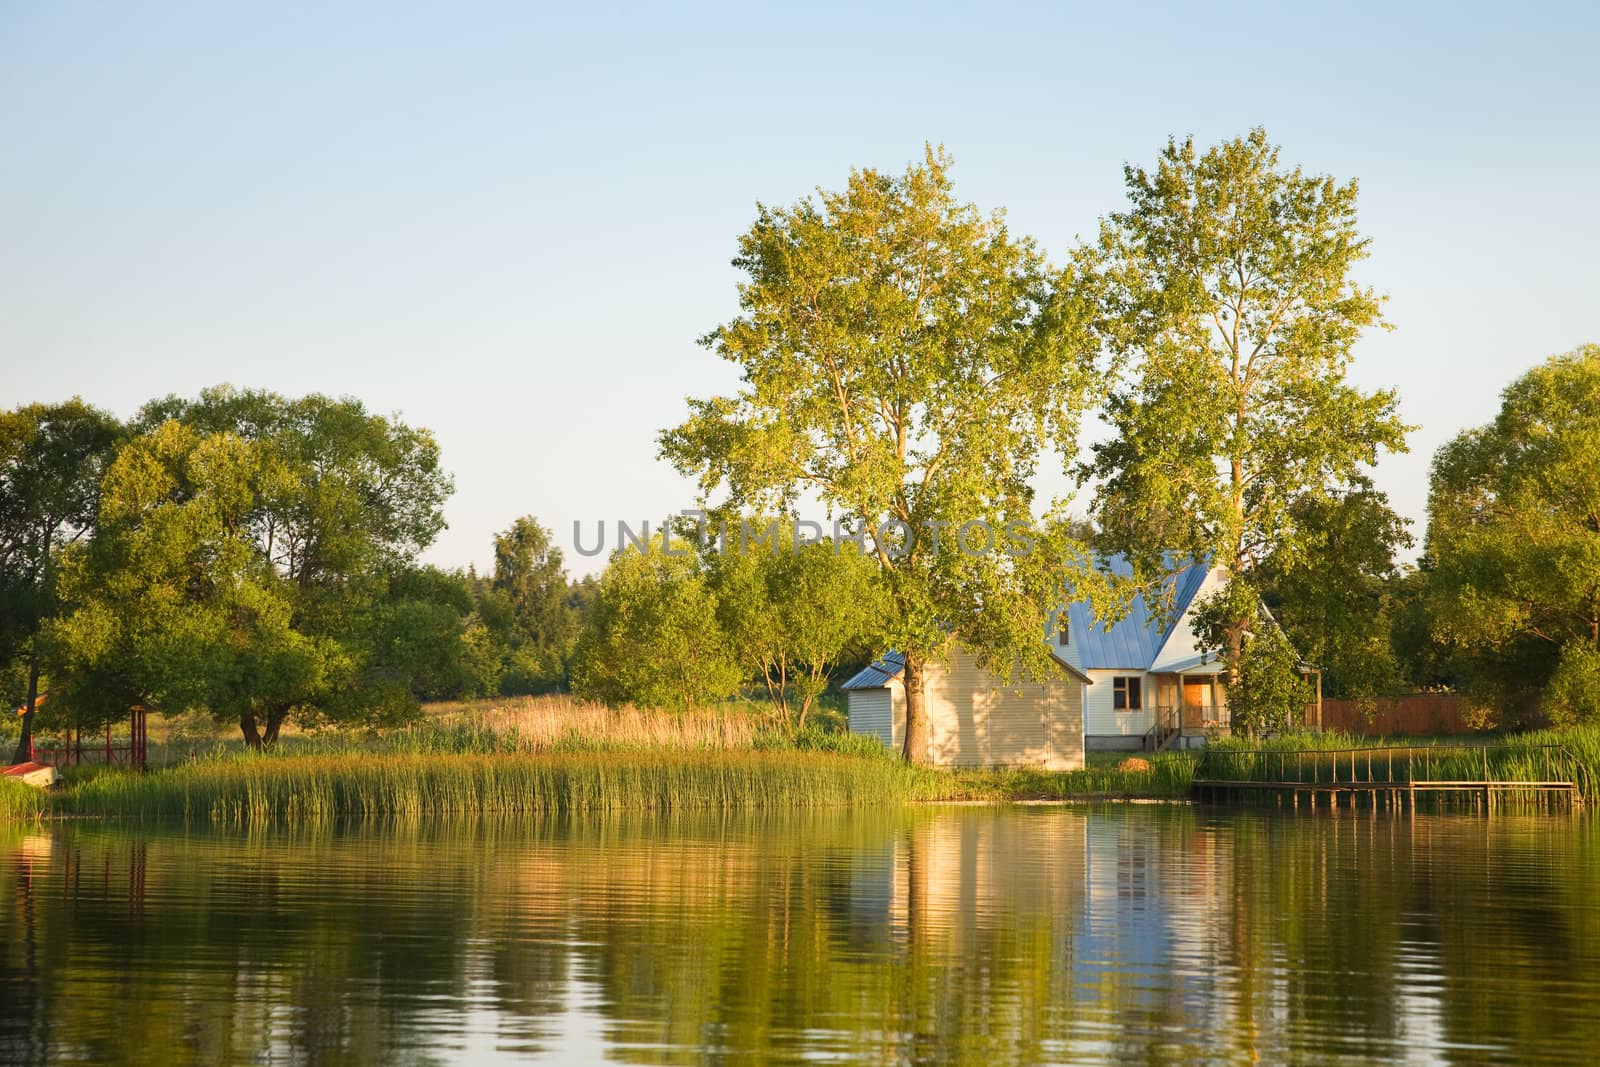 The lake, trees and house reflected in water